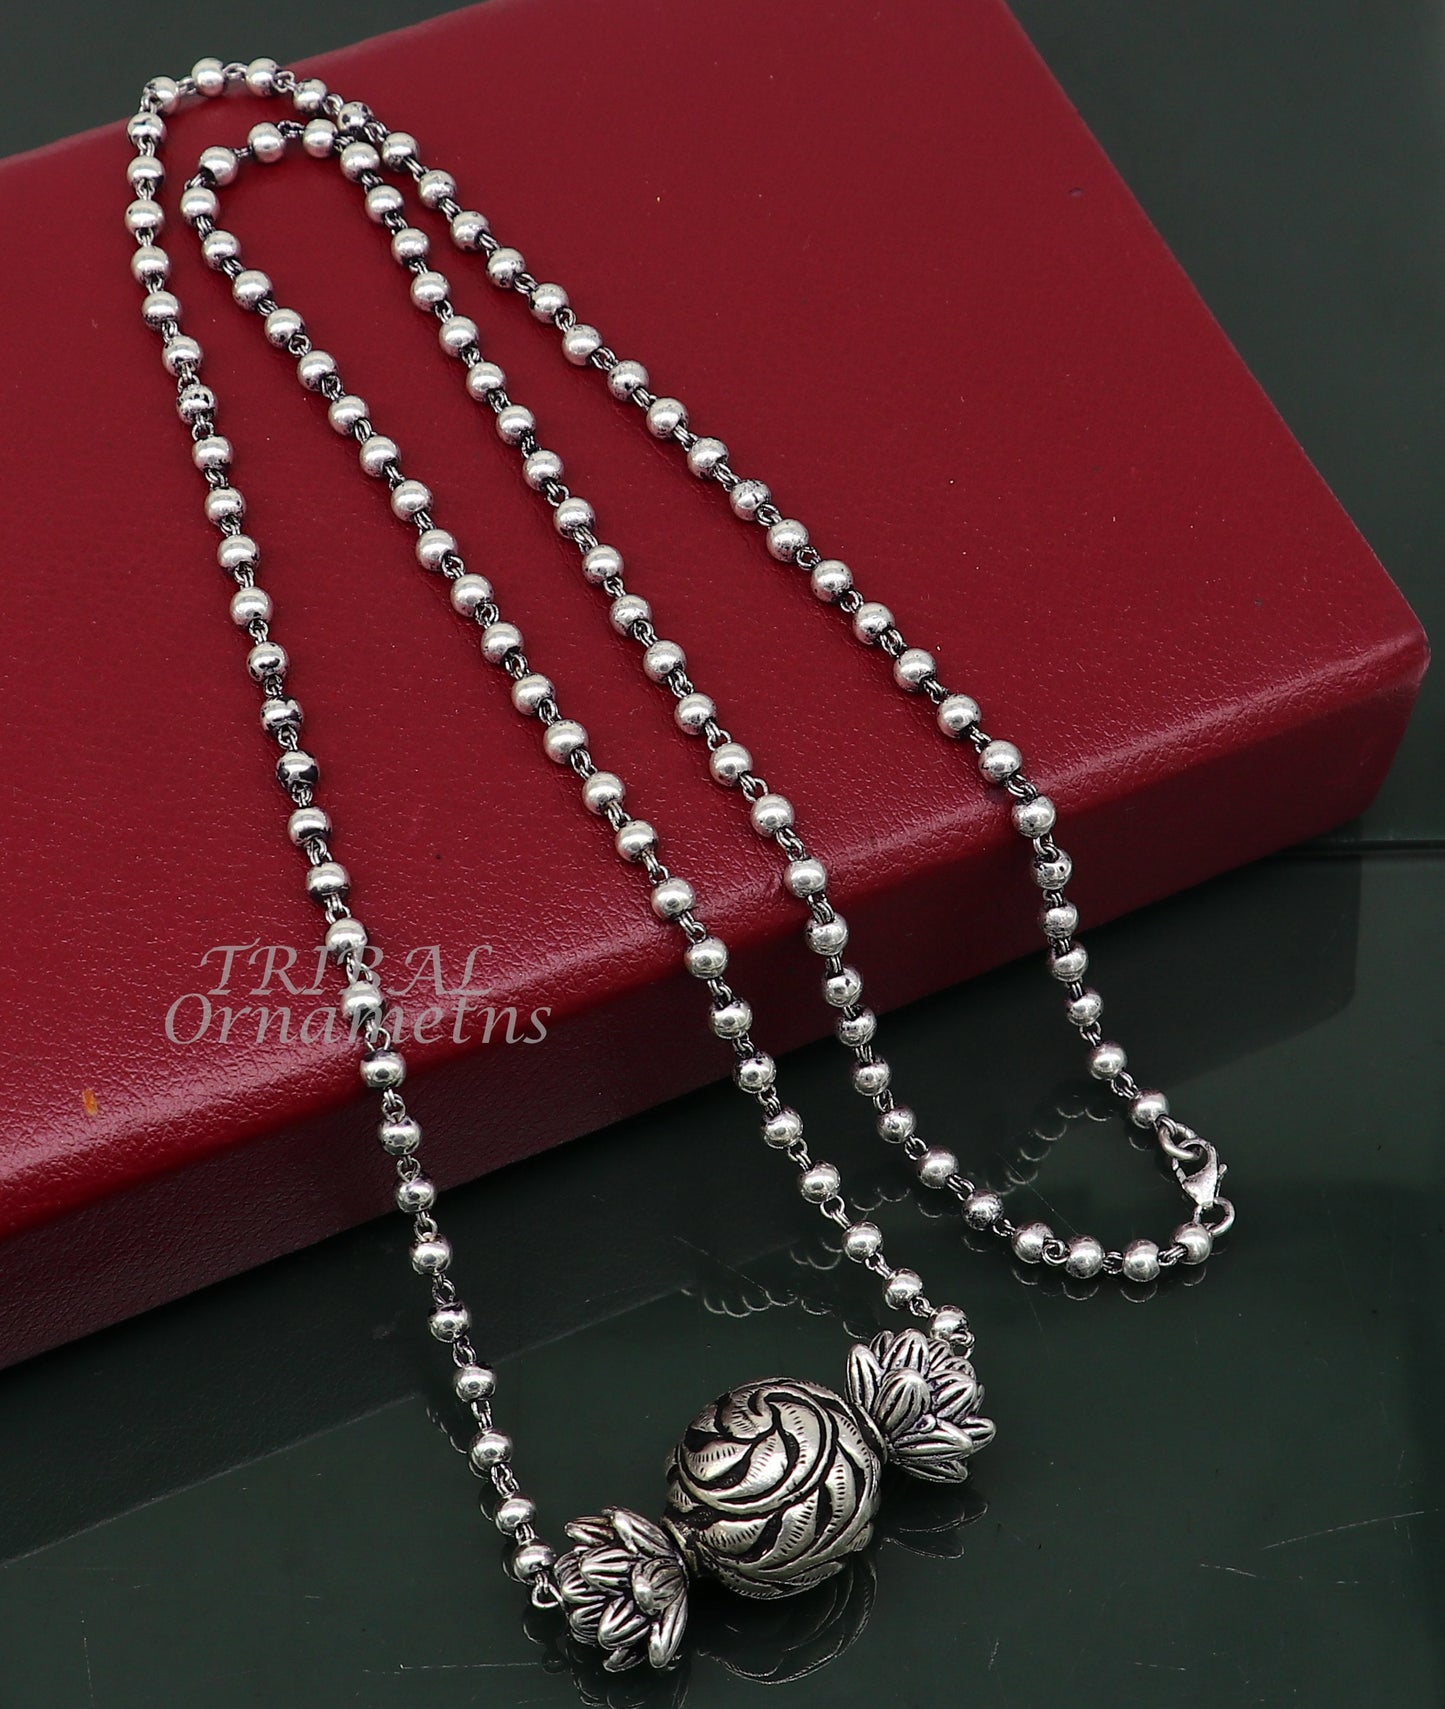 925 sterling silver handmade 4mm beads long necklace, unique ball design pendant traditional cultural functional necklace jewelry  SET535 - TRIBAL ORNAMENTS